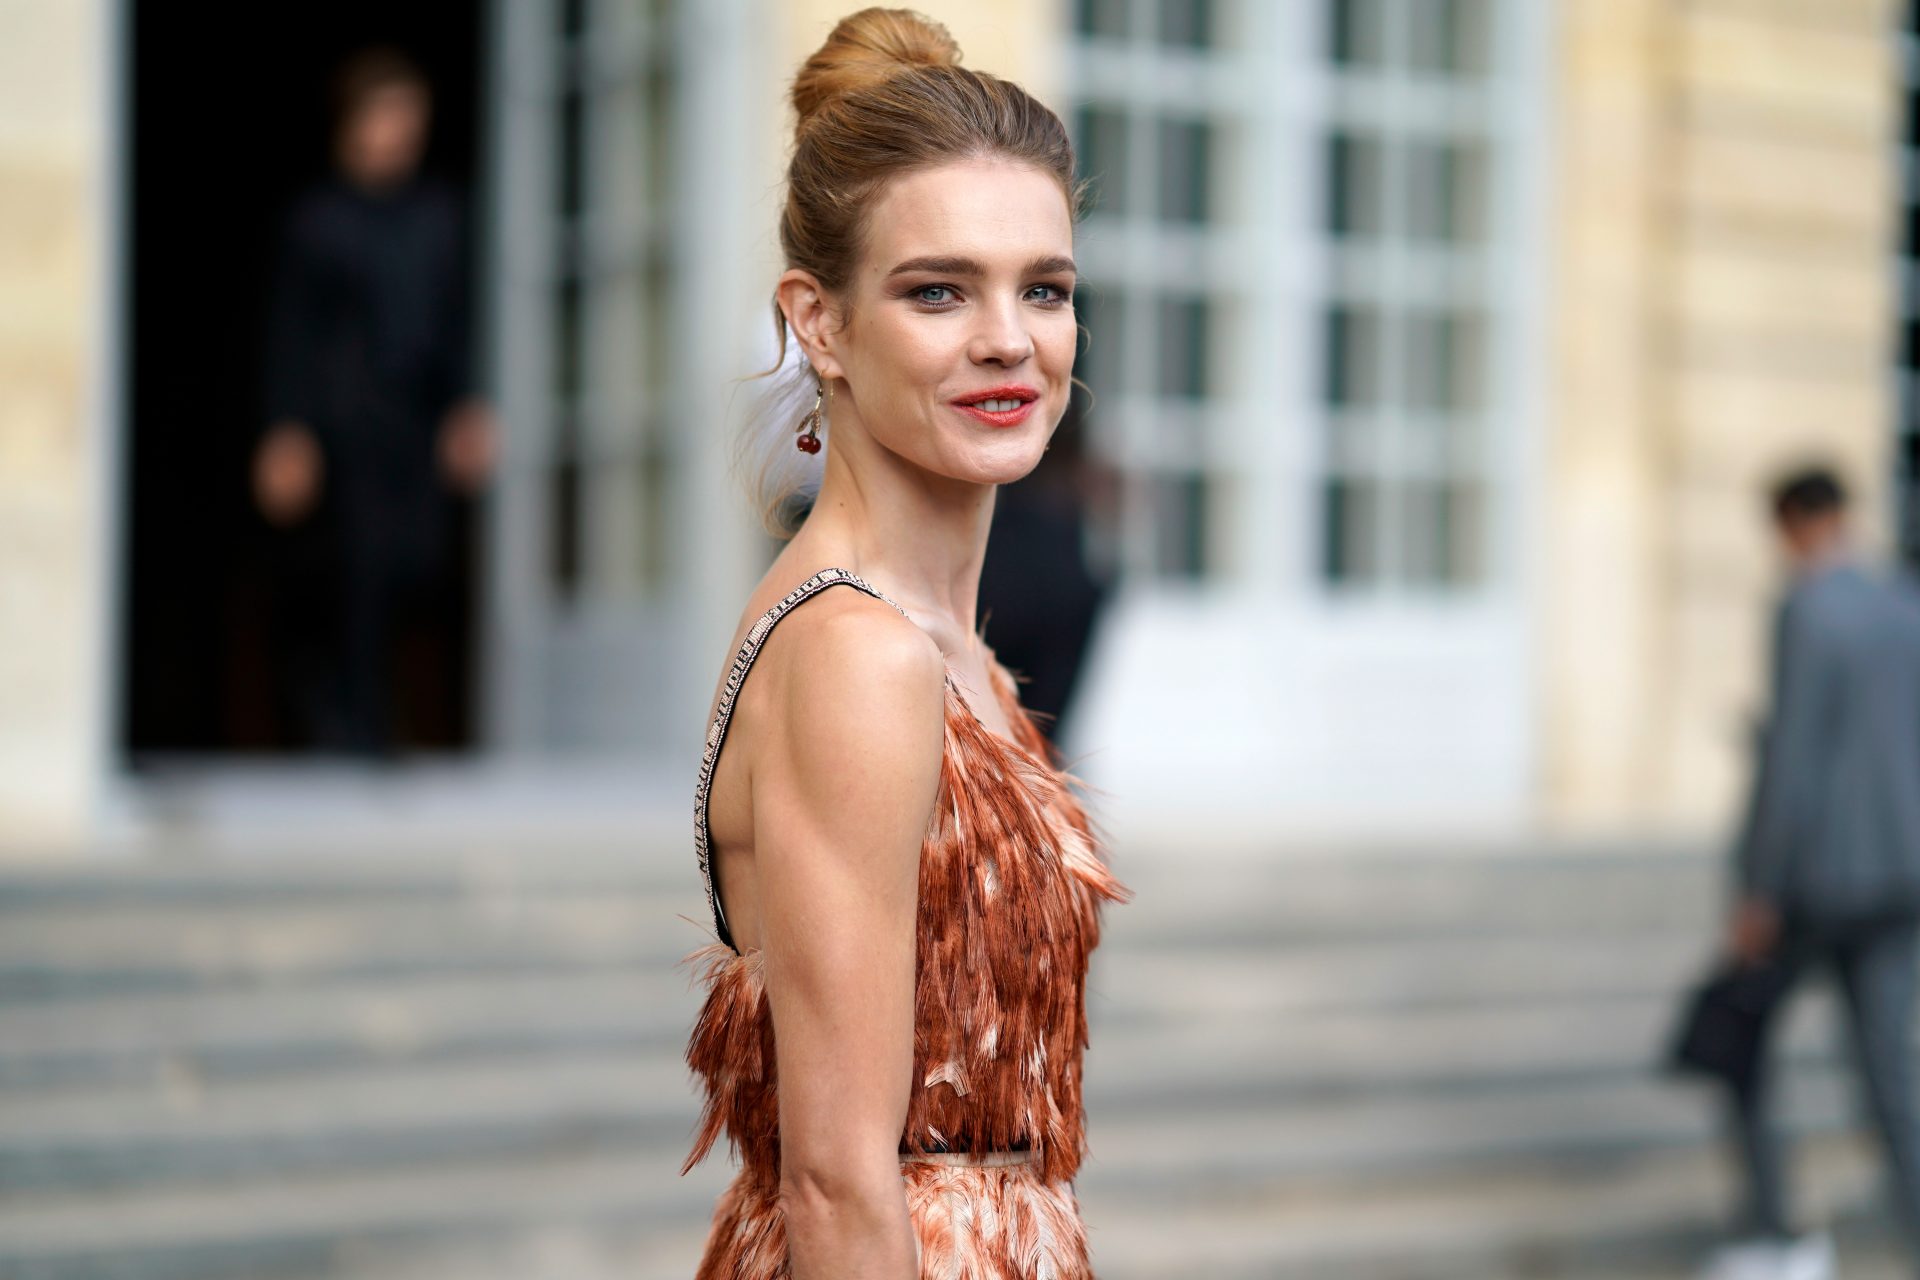 <p>Russian-born Natalia Vodianova, nicknamed Supernova, born in 1982, shines not only as a top model but also as an actress, seen in 'CQ' (2001), 'Clash of the Titans' (2010), and 'Belle du Seigneur' (2013).</p> <p>Net worth: $50 million</p>